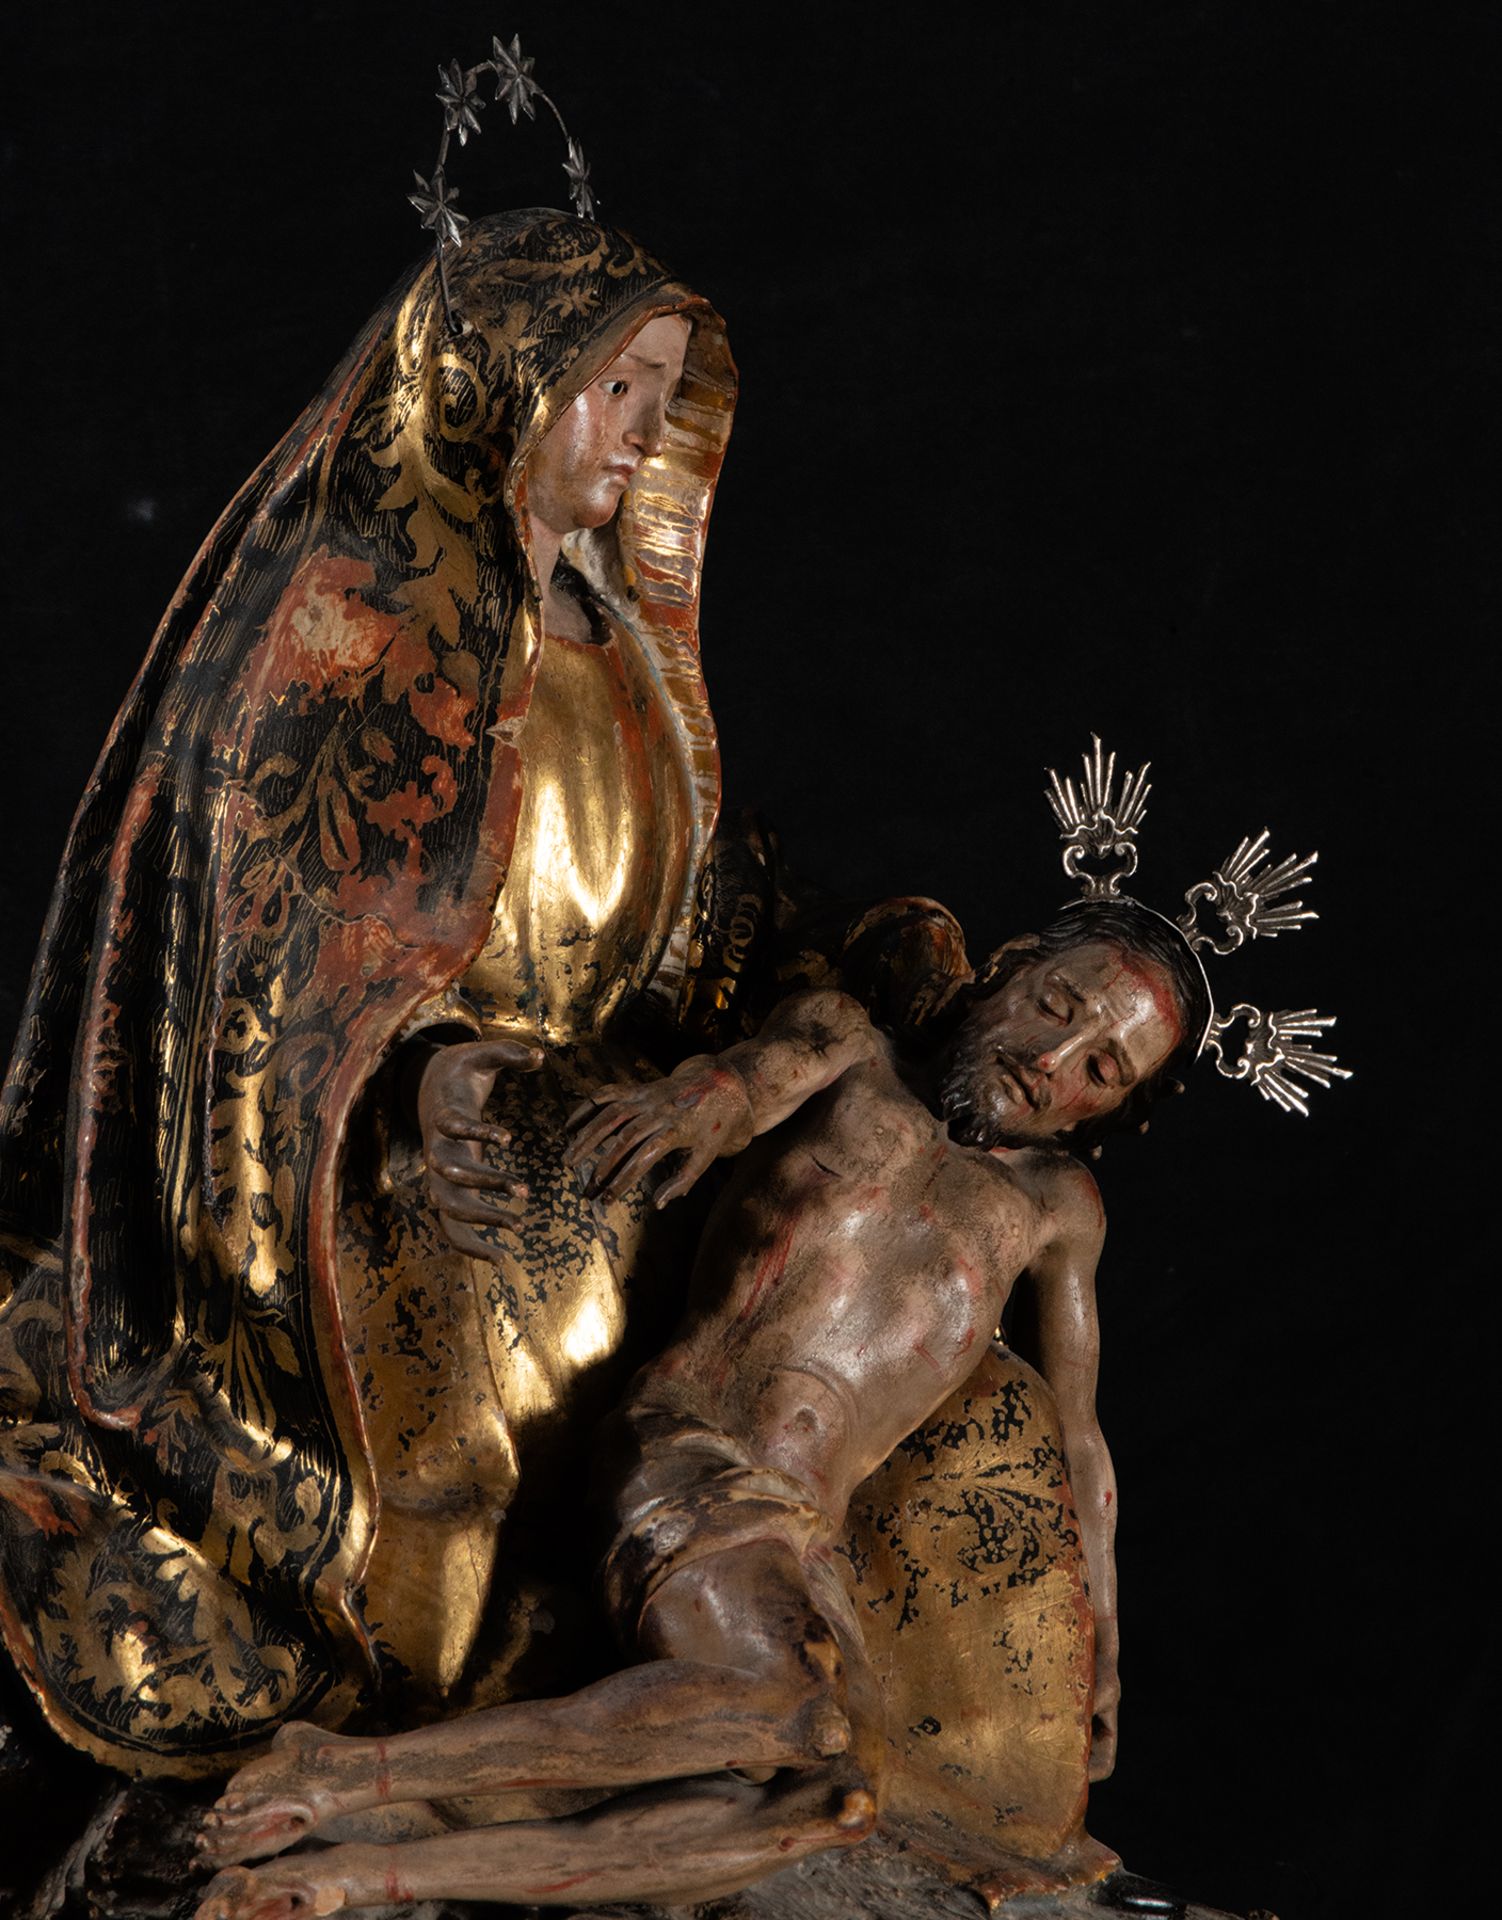 Exceptional Pieta depicting Mary with Christ in her arms, Guatemala, early 18th century Novohisopano - Image 6 of 8